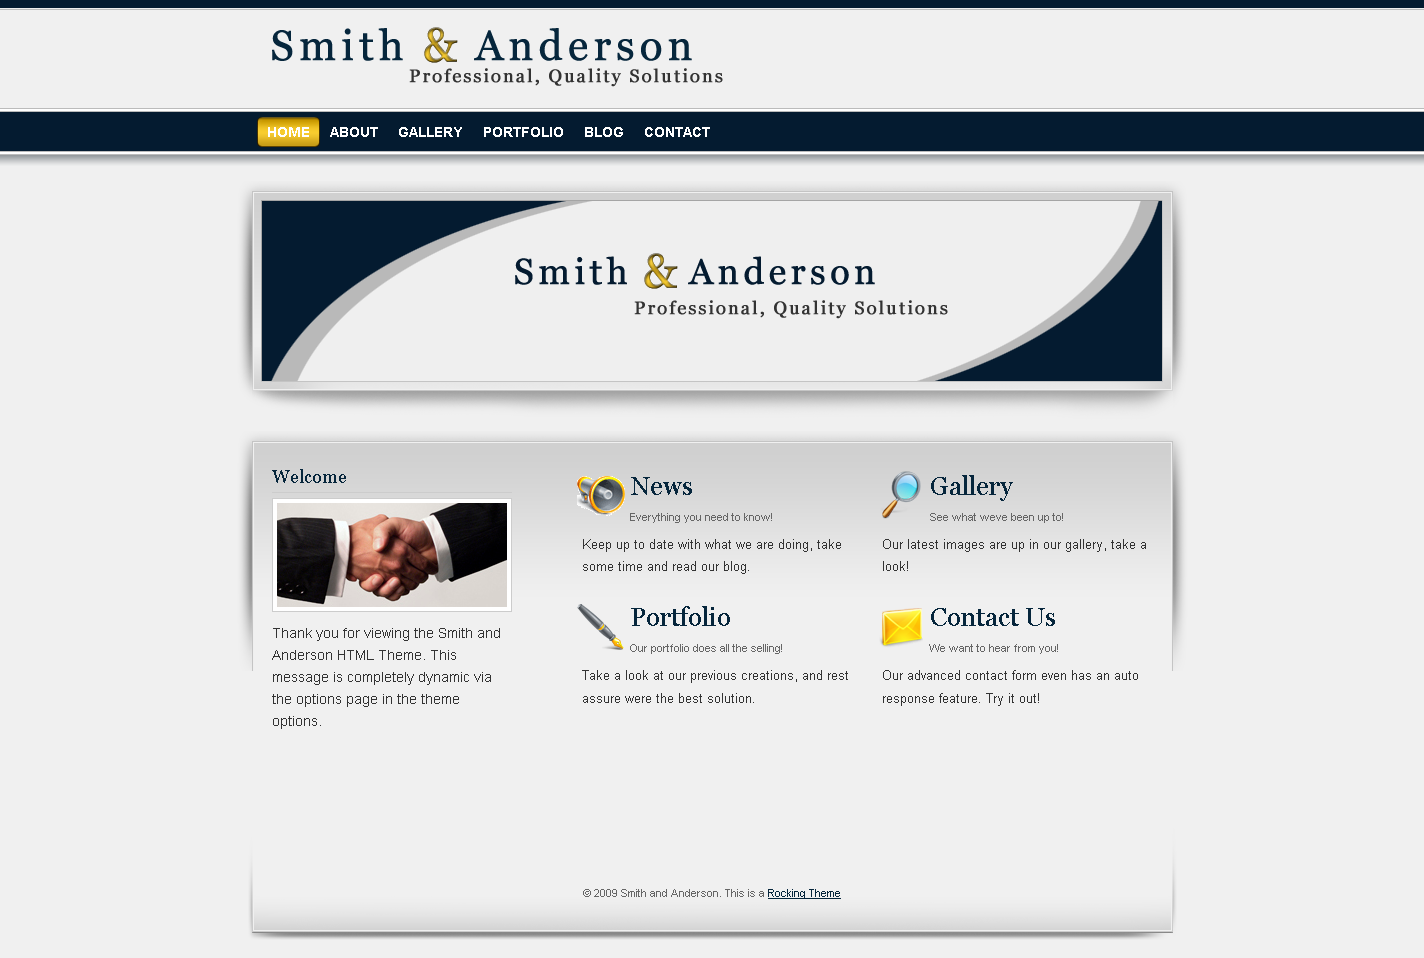 The Smith & Anderson